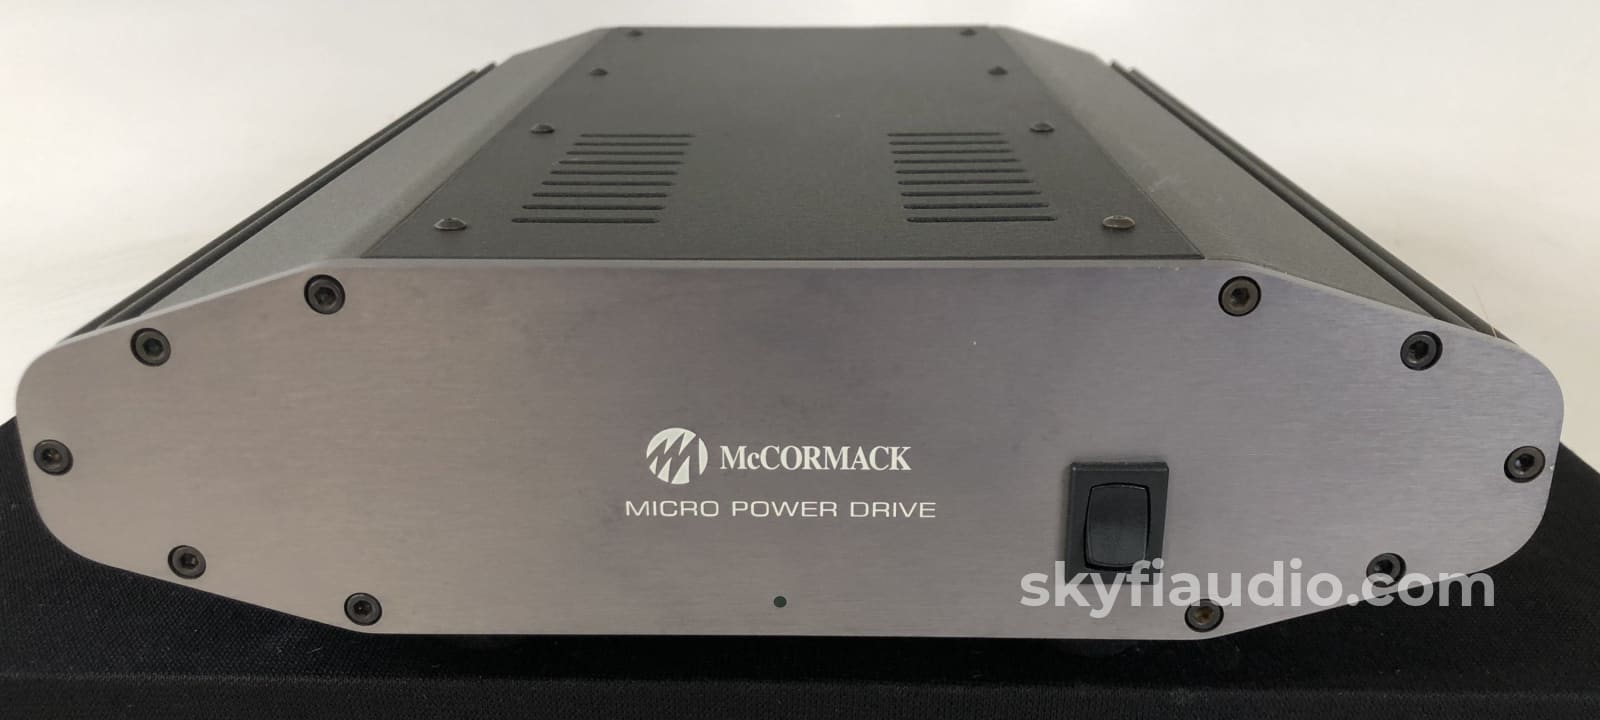 Mccormack Micro Power Drive Solid State Stereo Amplifier (A)